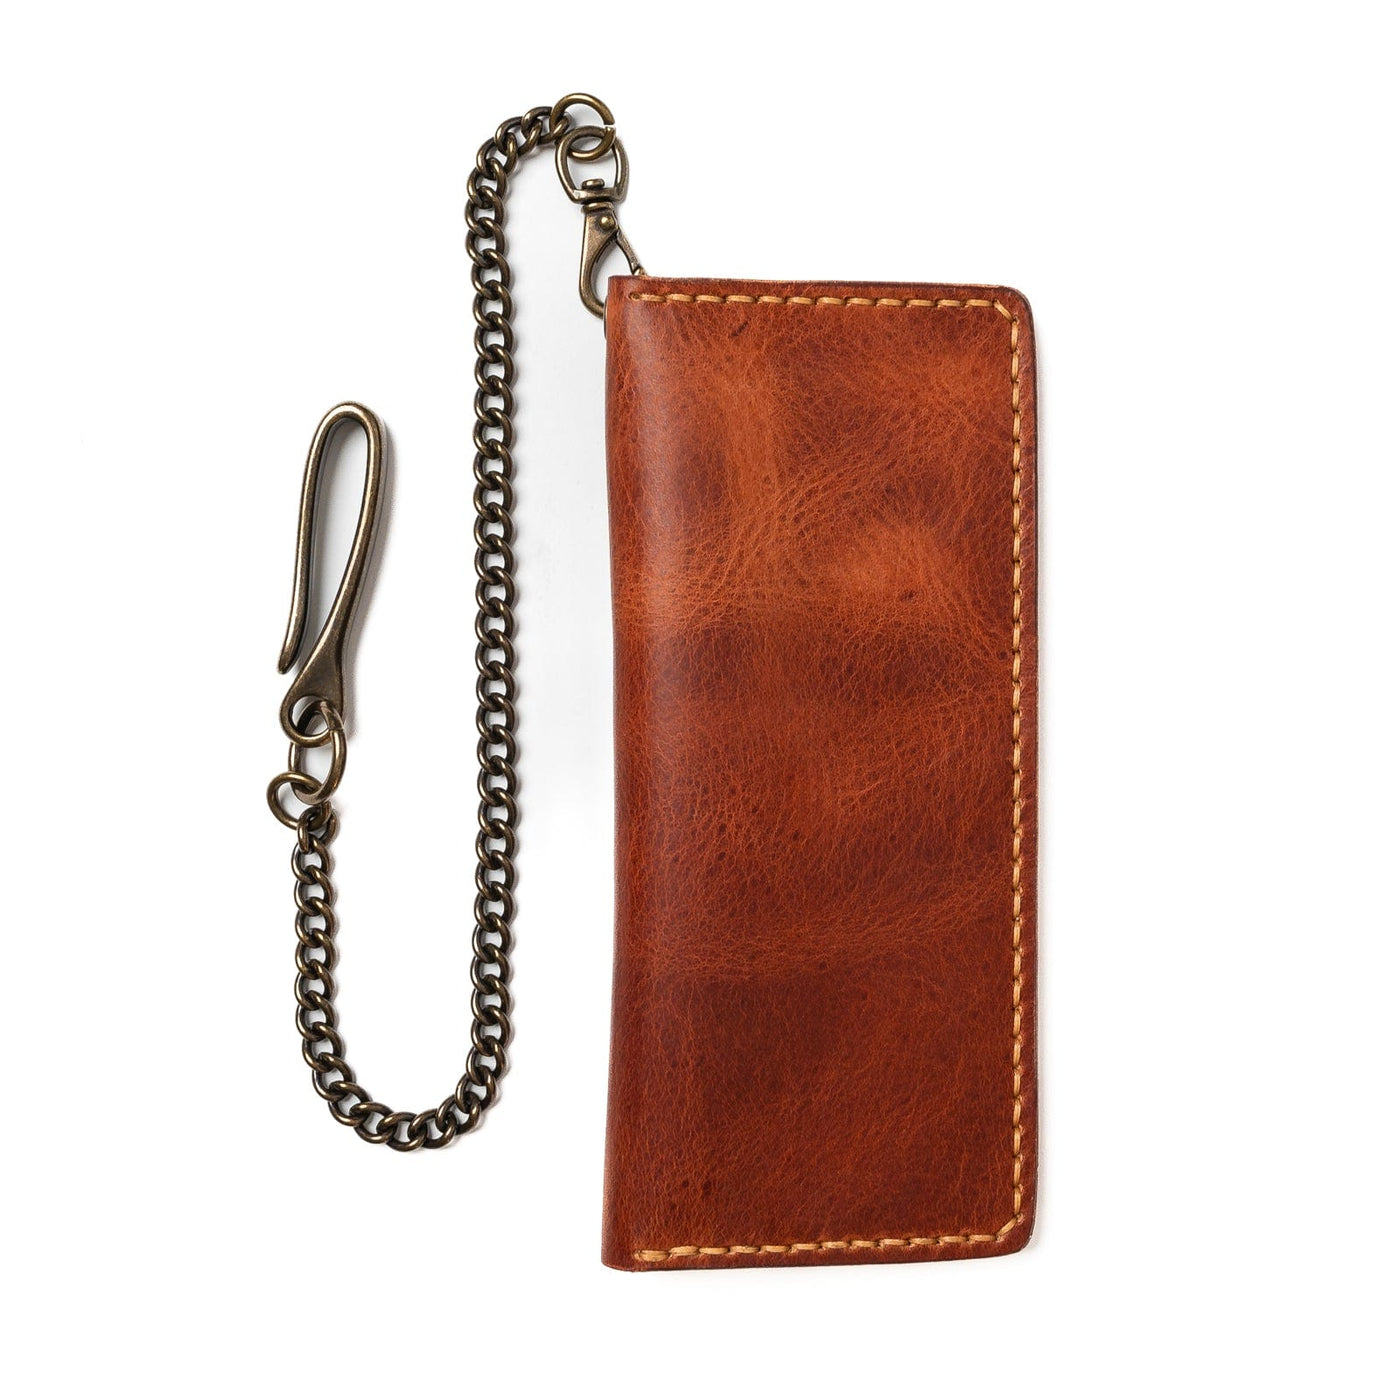 English Tan Long Wallet: A Statement of Quality & Function - Popov Leather®